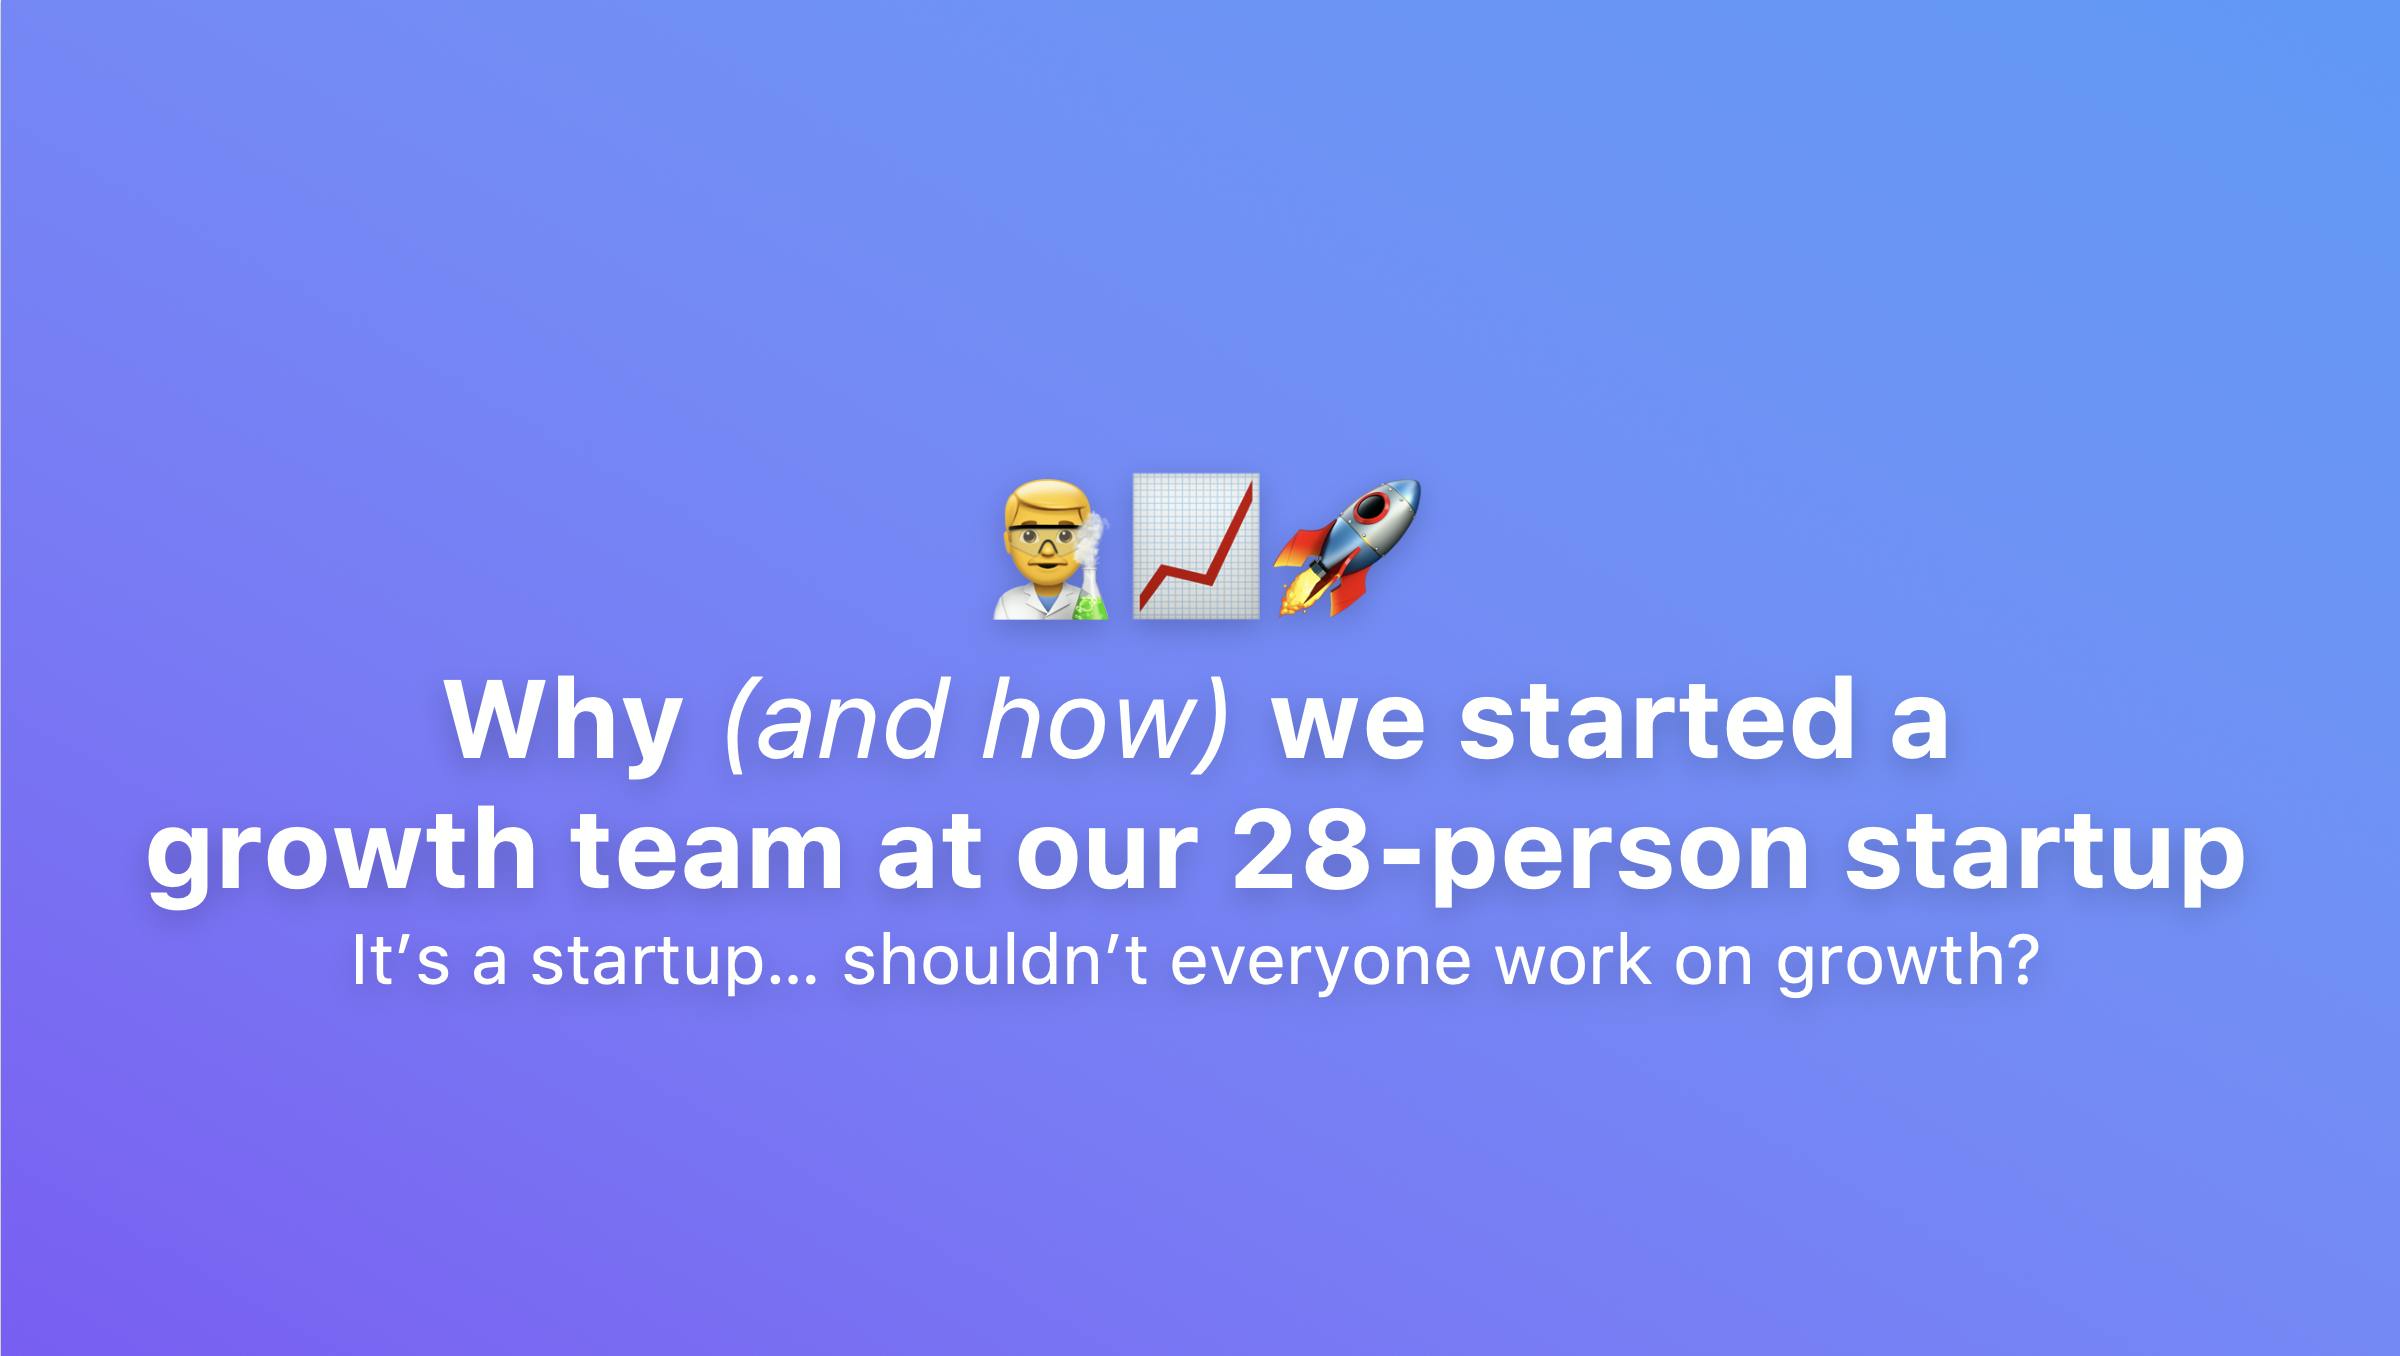 /why-and-how-we-started-a-growth-team-at-our-28-person-startup-849dcd8da554 feature image